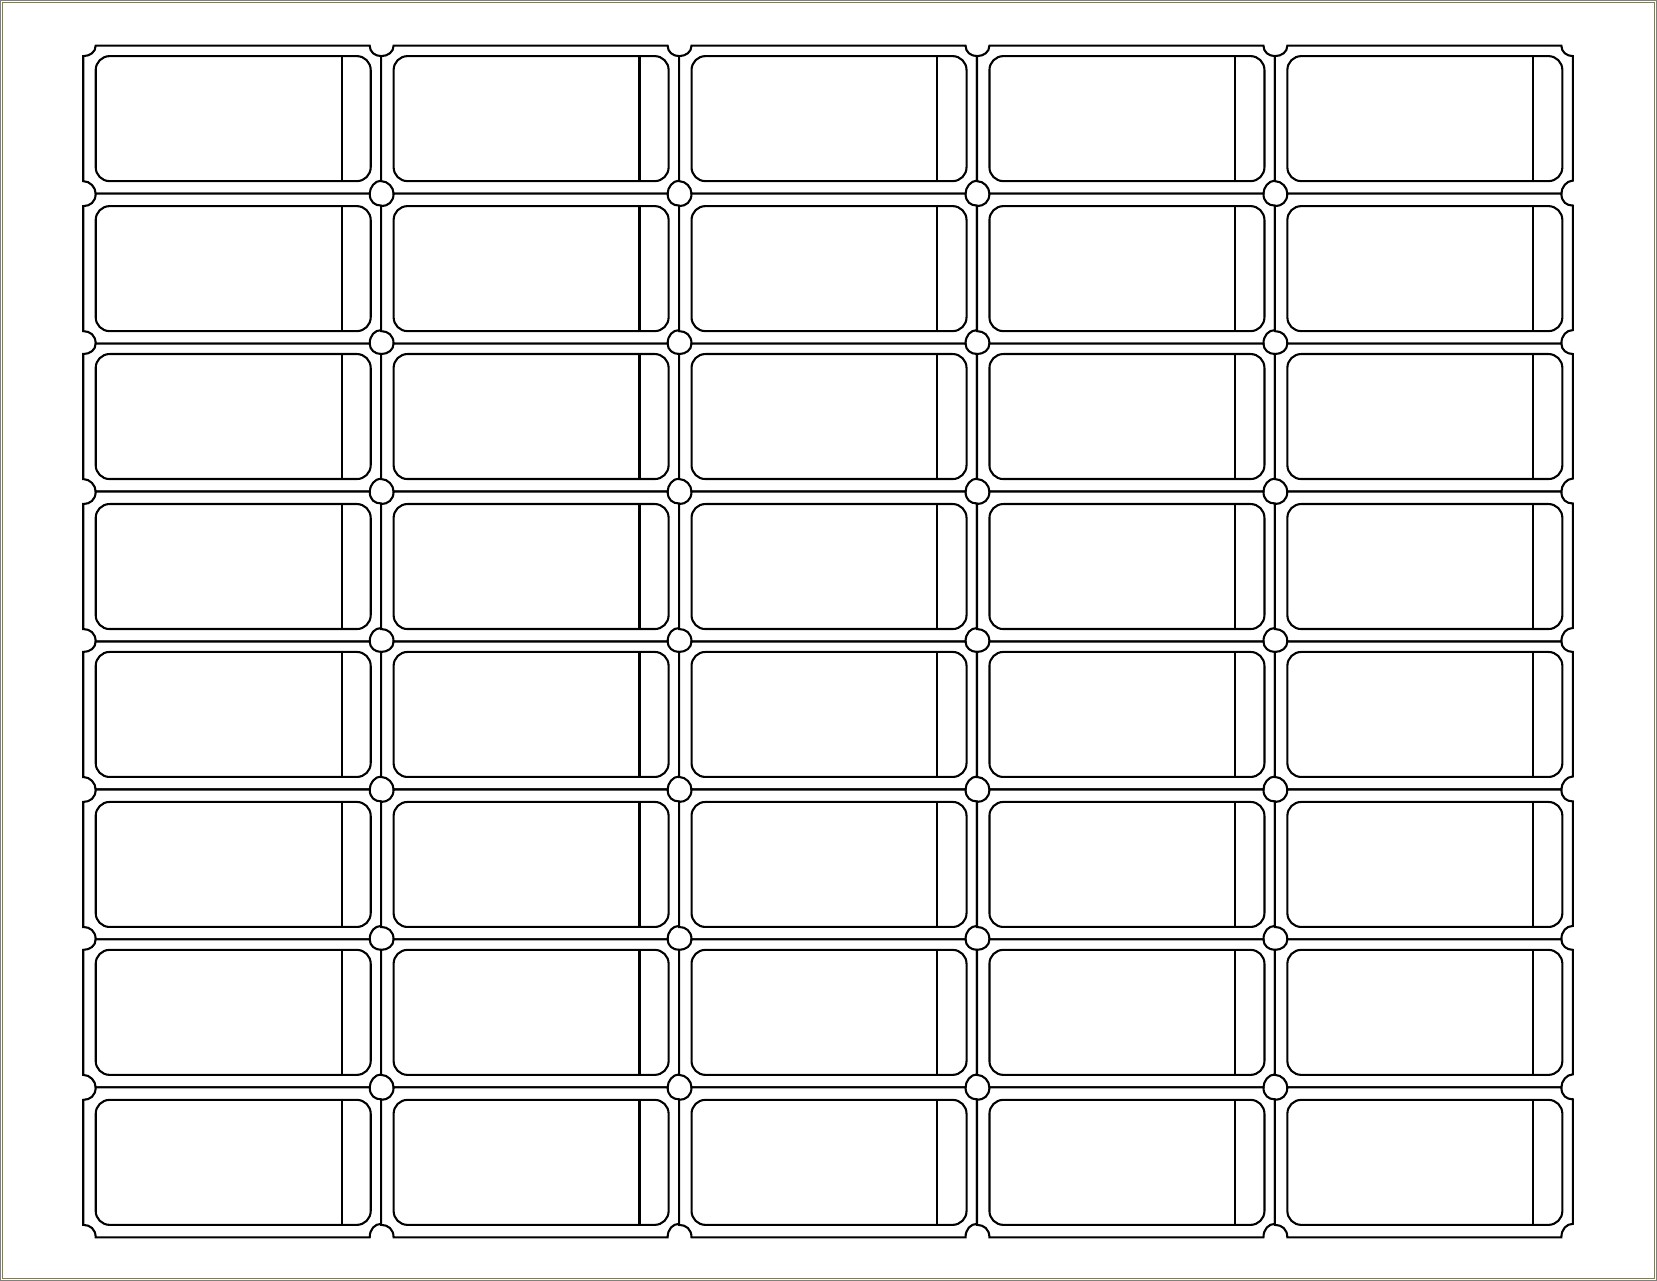 Free Printable Raffle Ticket Template With Numbers